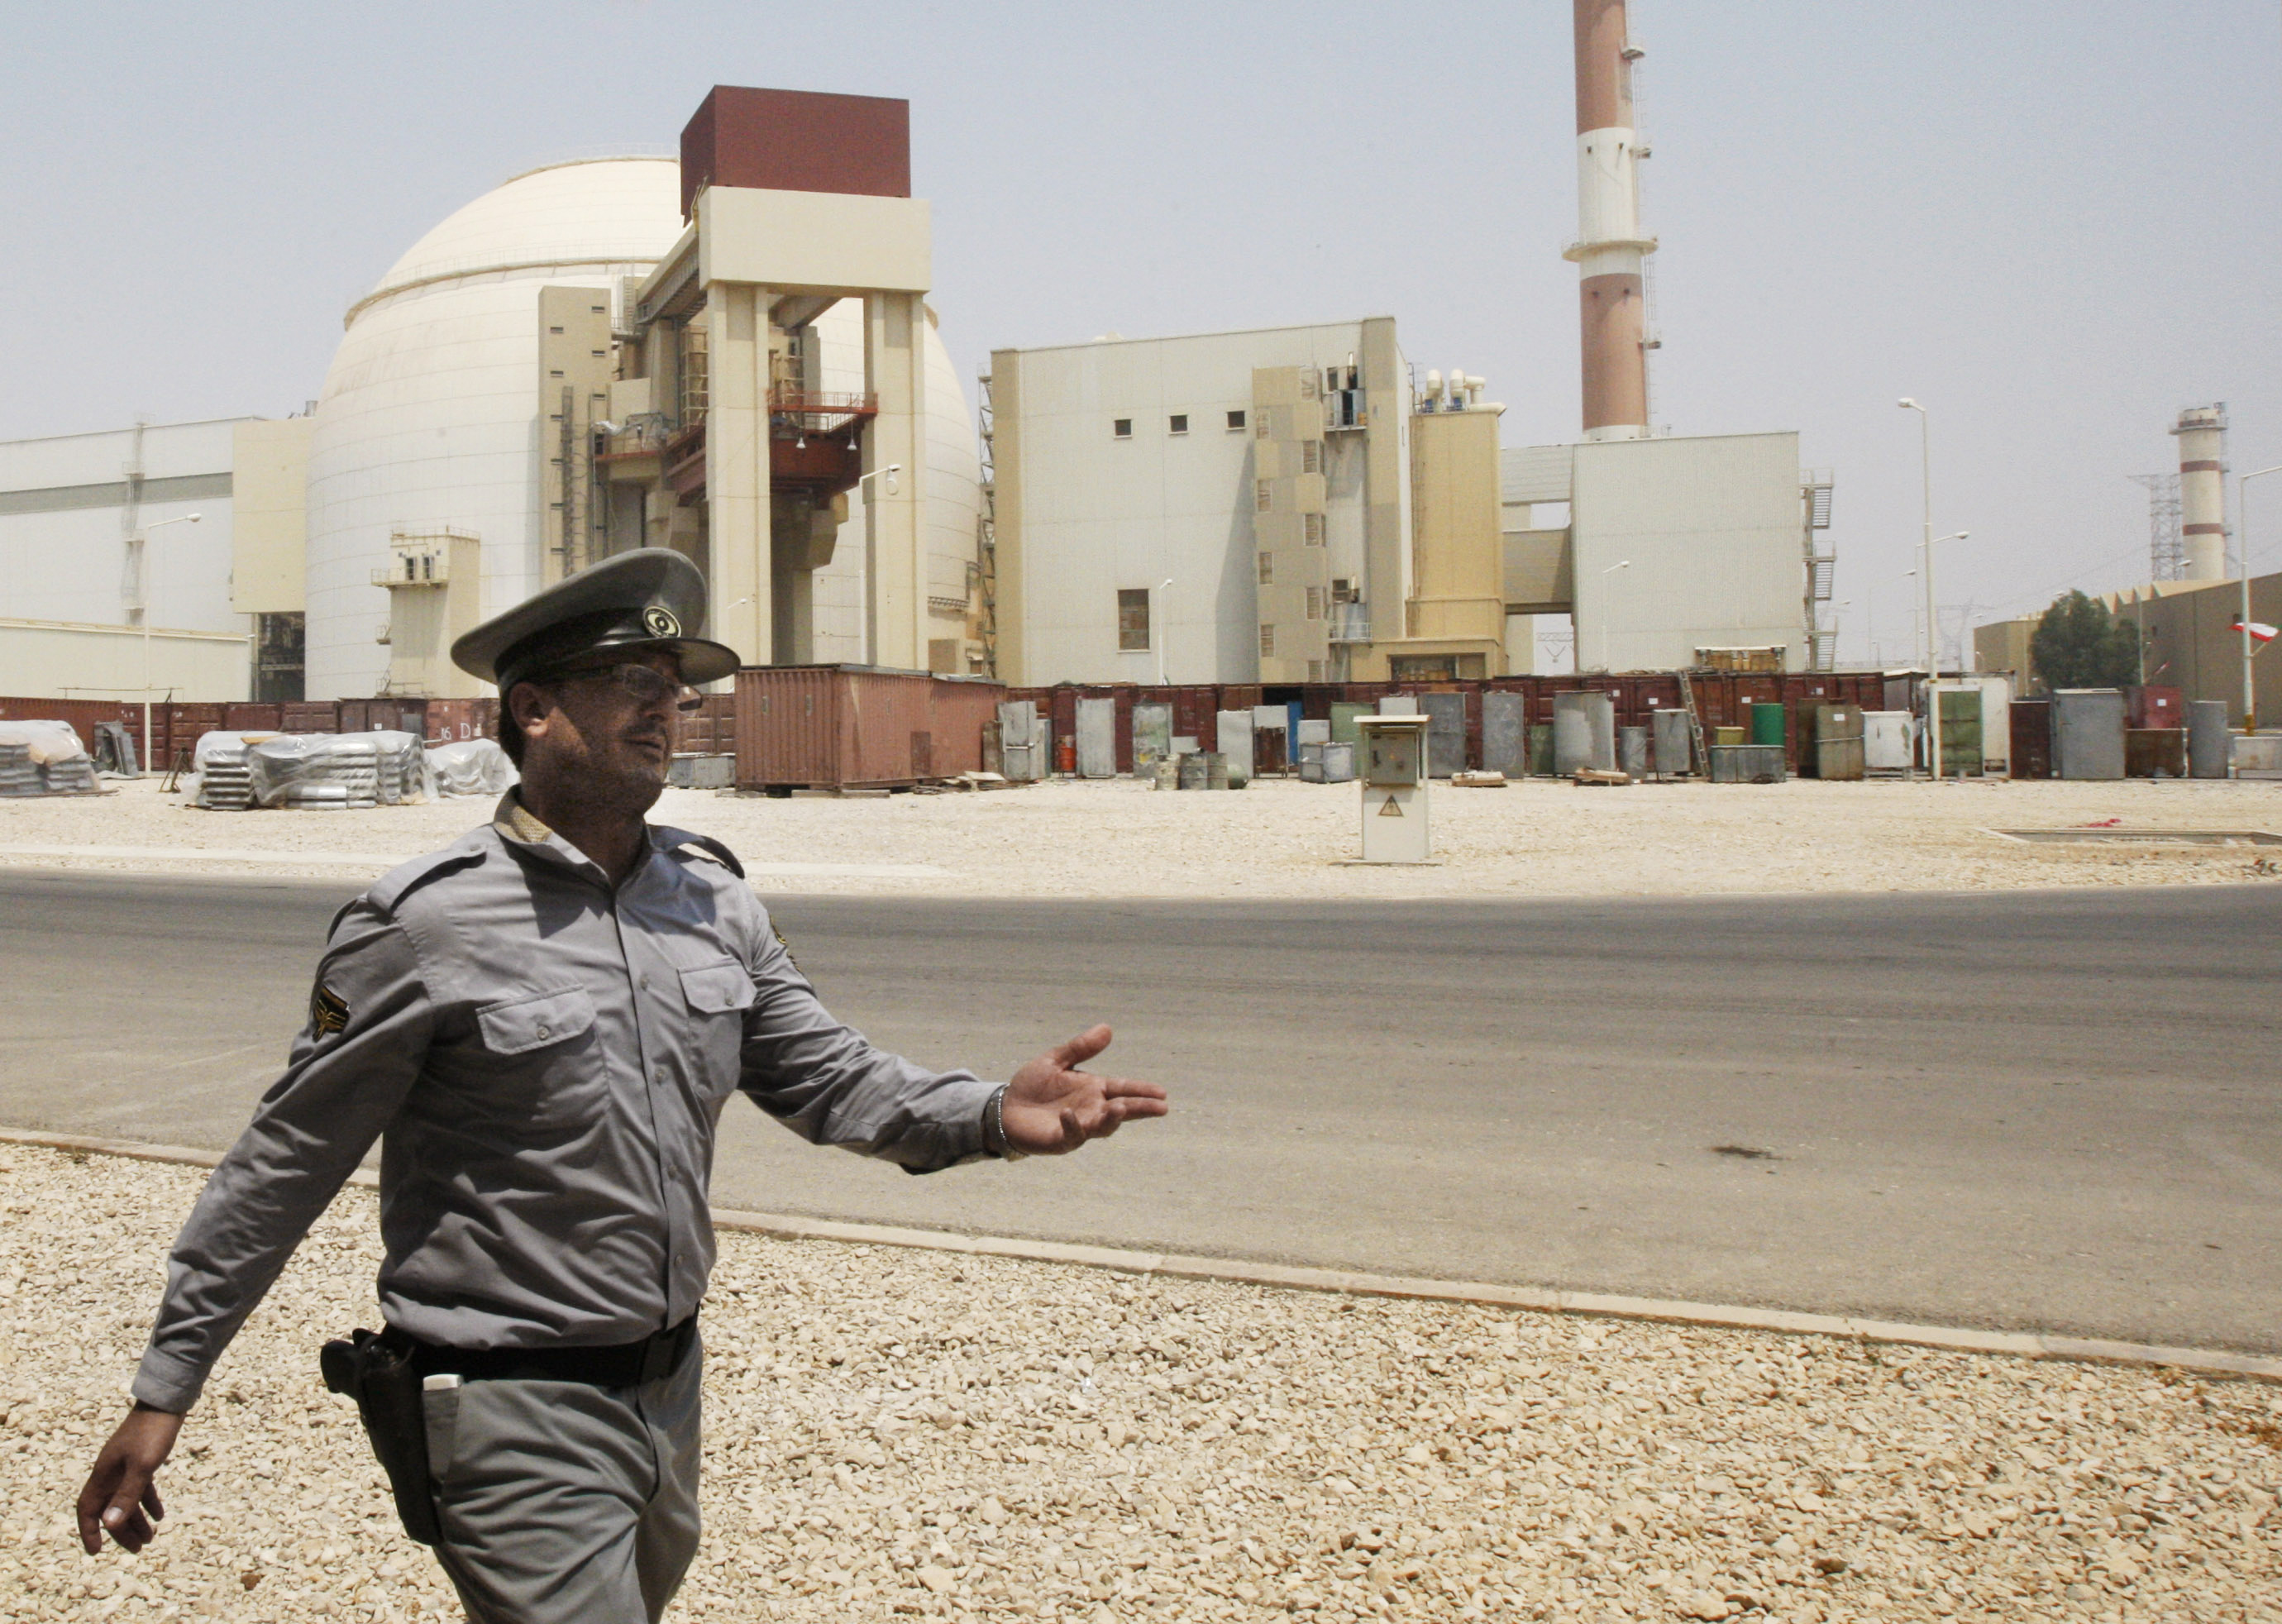 An Iranian security officer directs media at the Bushehr nuclear power plant, with the reactor building seen in the background, just outside the southern city of Bushehr, Iran.  (AP Photo/Vahid Salemi)